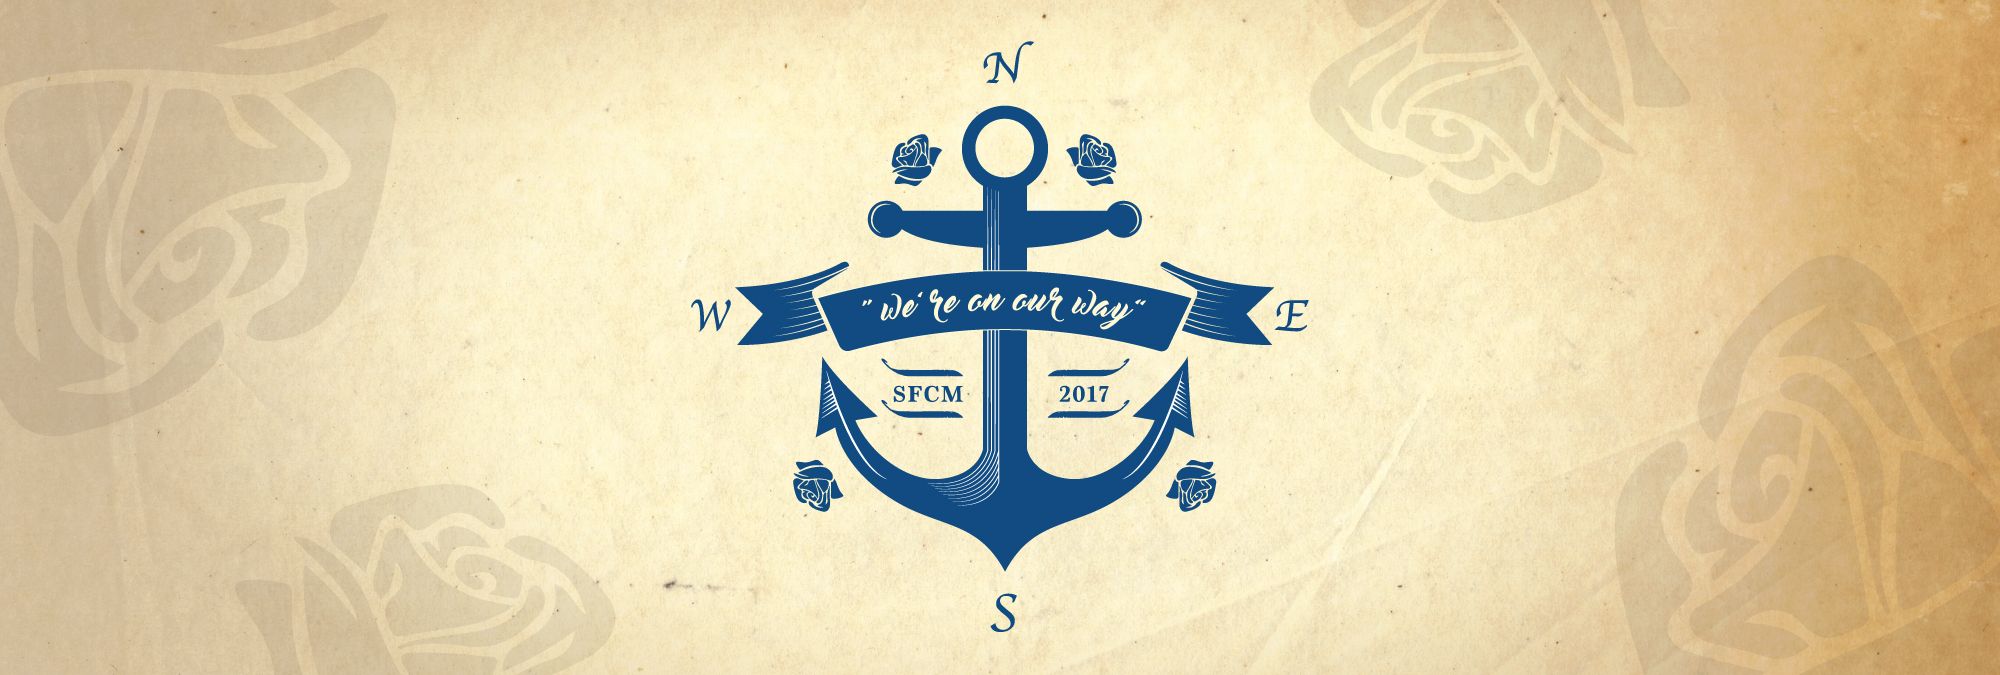 SFCM 2017 "We're on our way" compass anchor